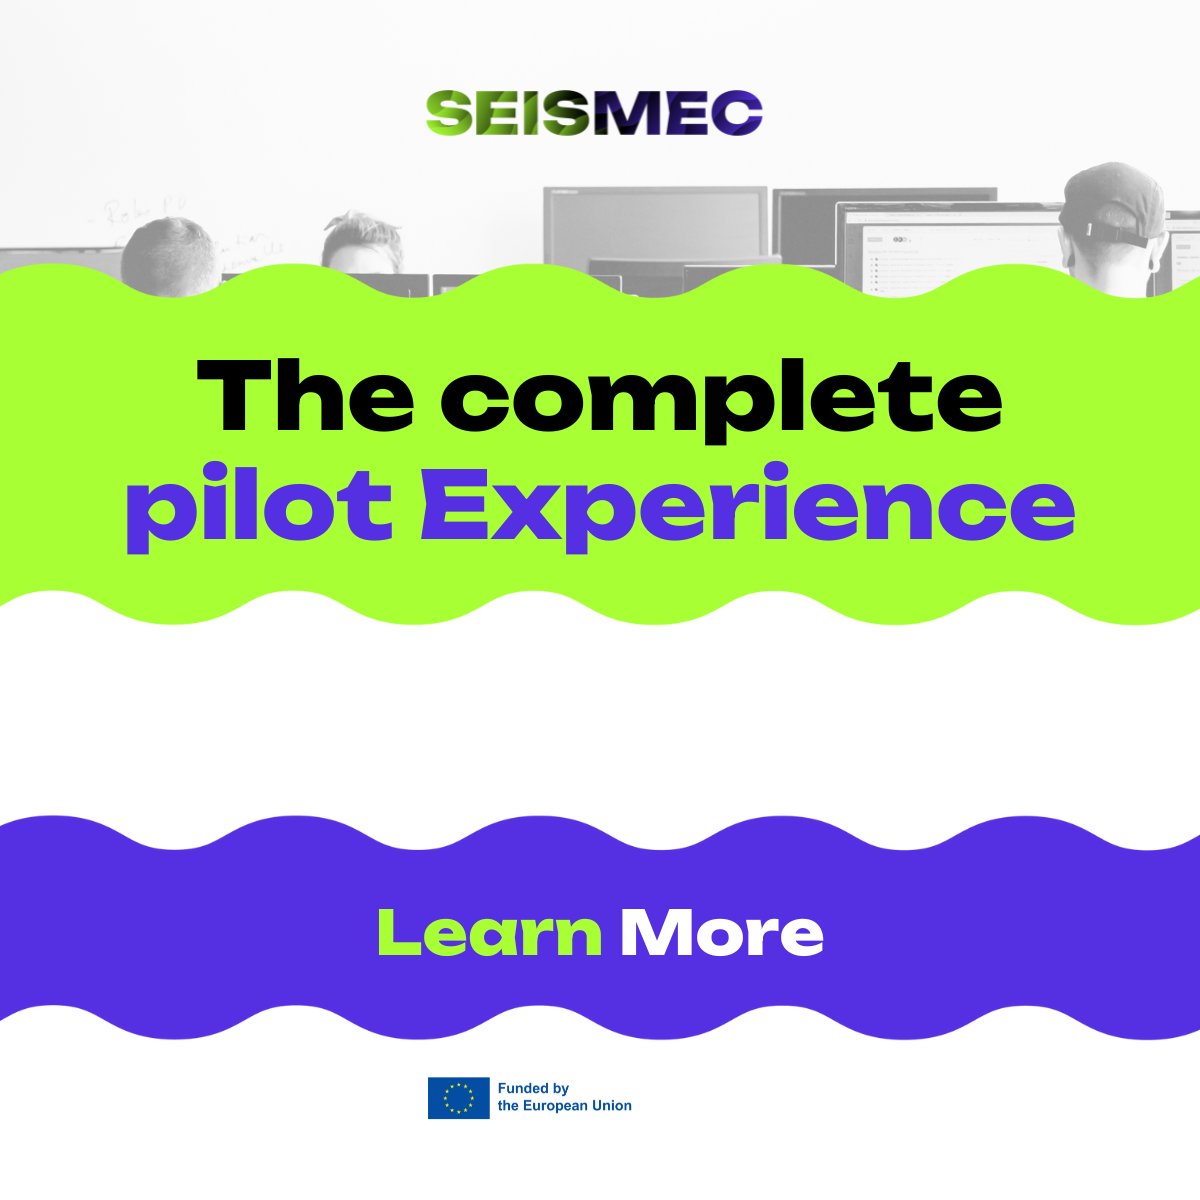 🎤The @SEISMEC_EU project will organize and execute pilots in 14 countries! The pilots will include differing value chains ranging from agri-food to transnational #retail within local innovation #ecosystems covering all company sizes! 👉Learn more: bit.ly/4aPpU1E